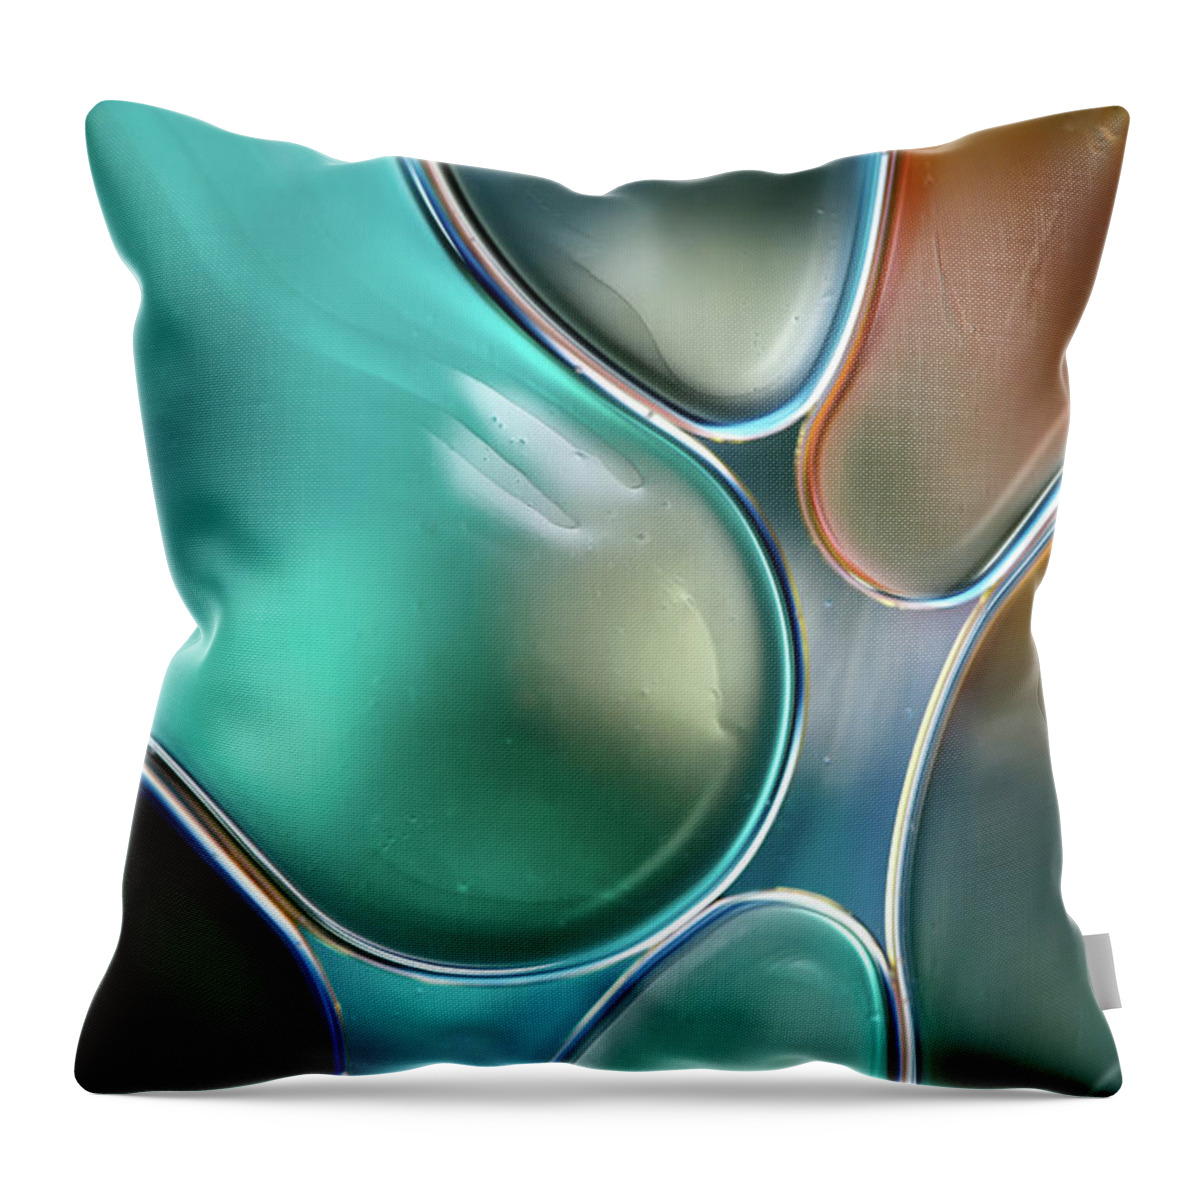 Purity Throw Pillow featuring the photograph Oil And Water Abstract by Mandy Disher Photography